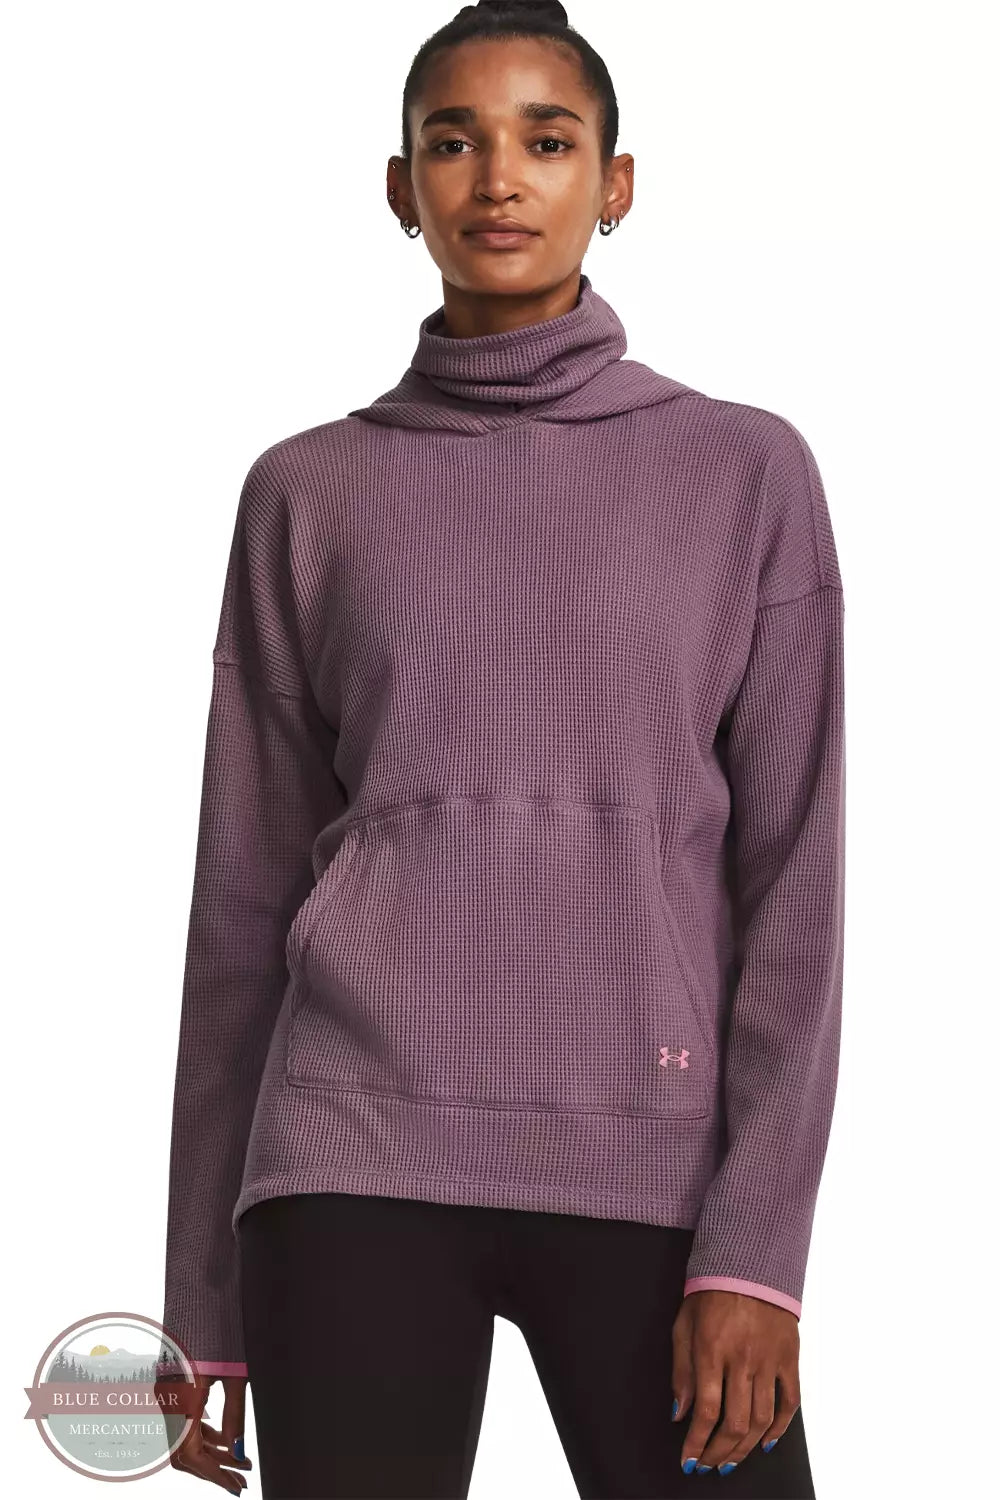 Under Armour 1373286 Waffle Funnel Hoodie Misty Purple Front View